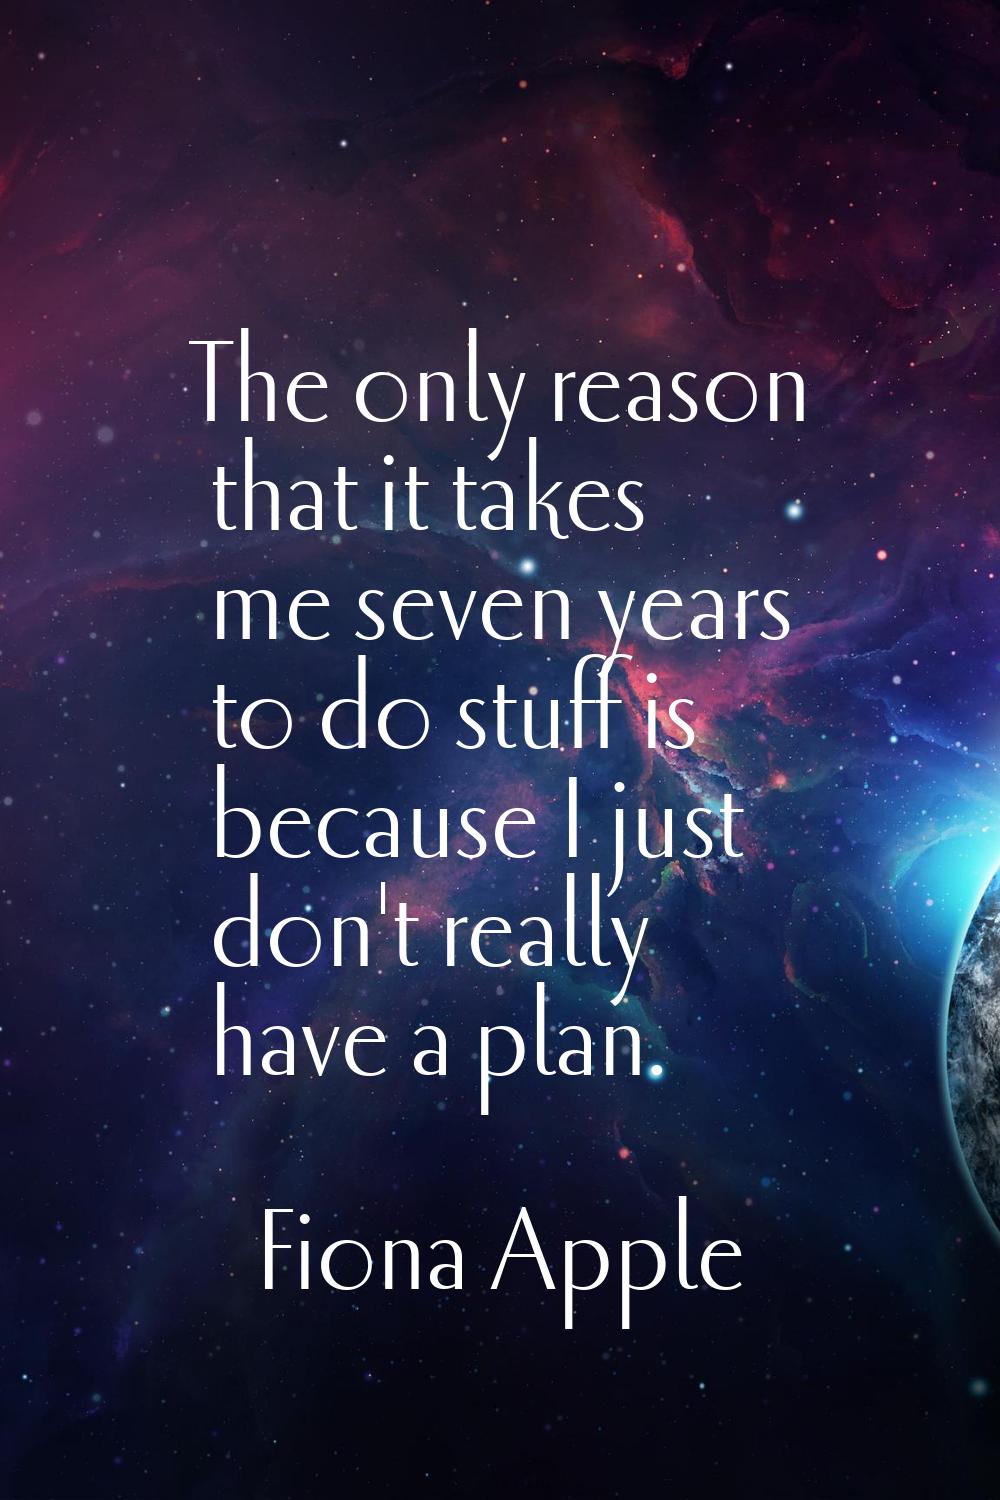 The only reason that it takes me seven years to do stuff is because I just don't really have a plan